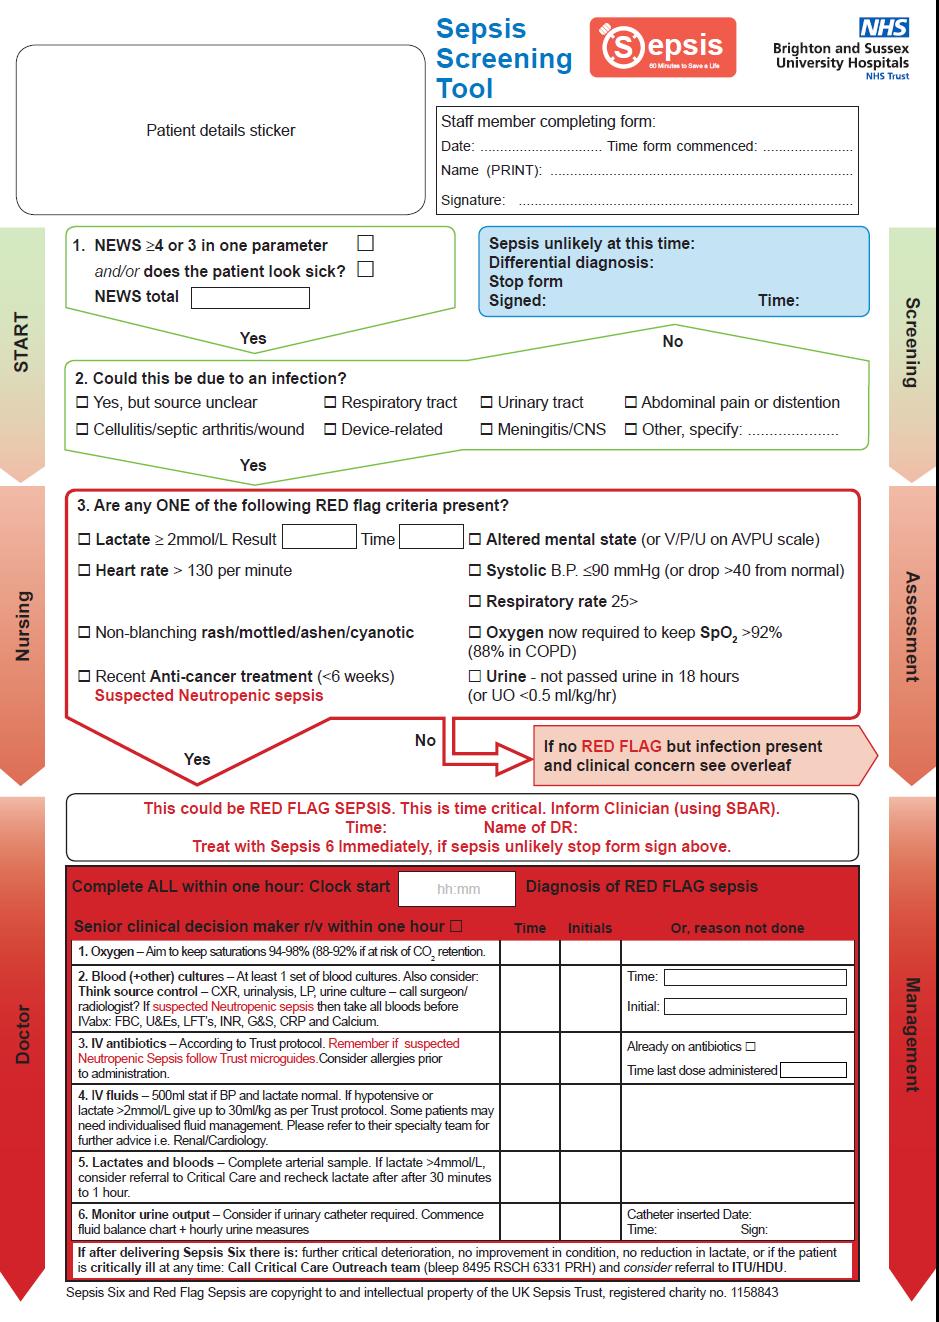 Appendix one Sepsis screening tool V1 Approved Clinical